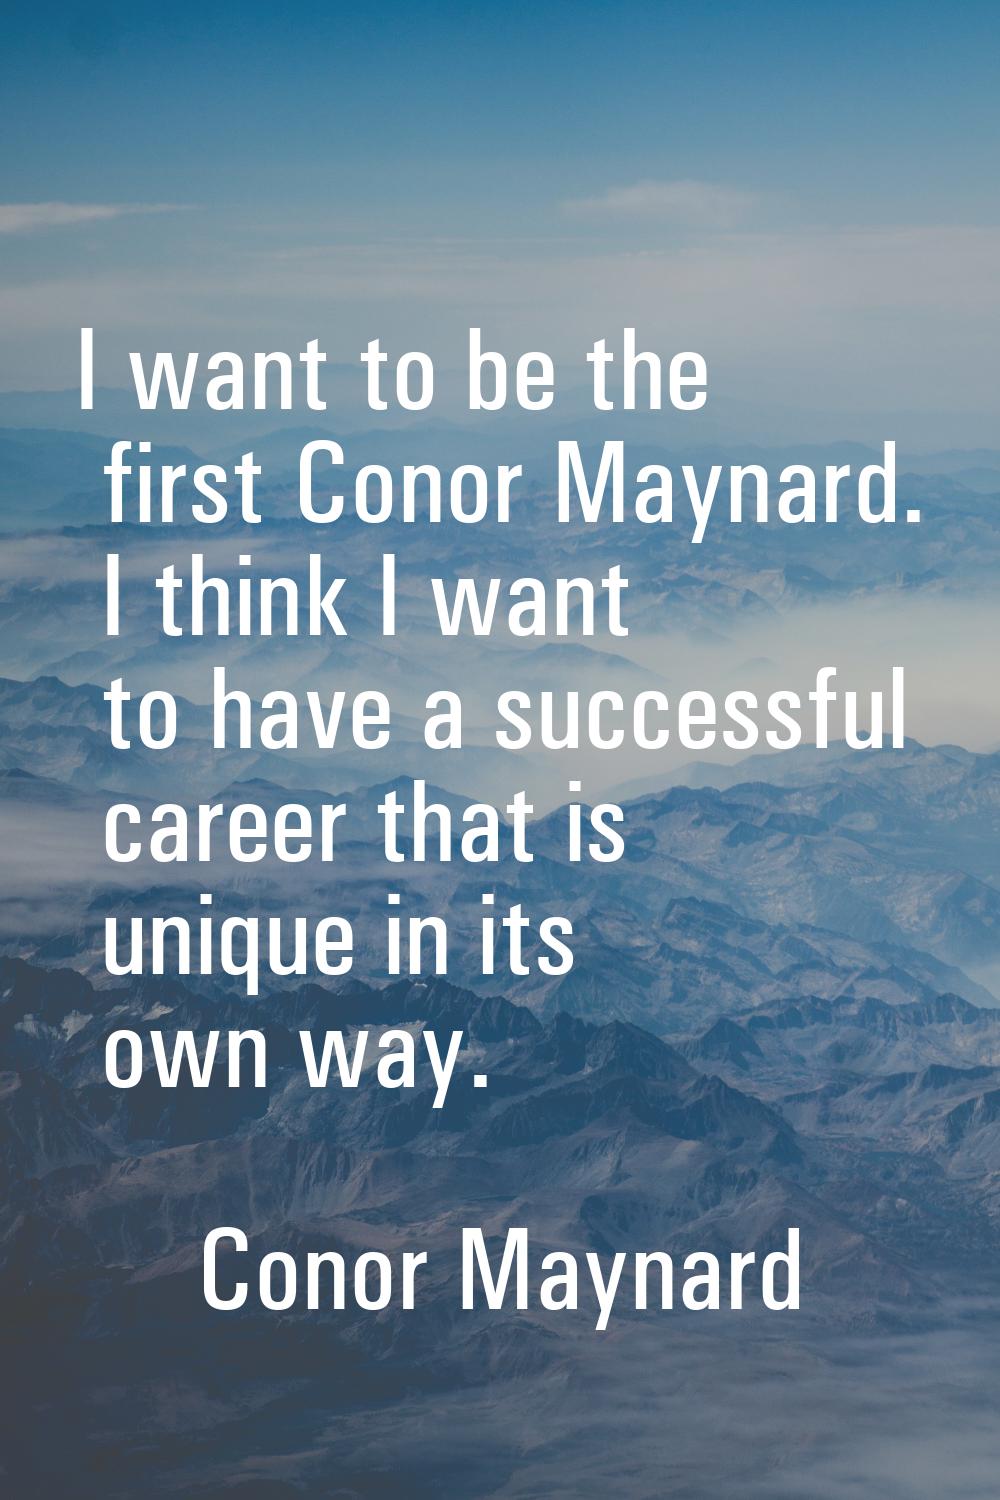 I want to be the first Conor Maynard. I think I want to have a successful career that is unique in 